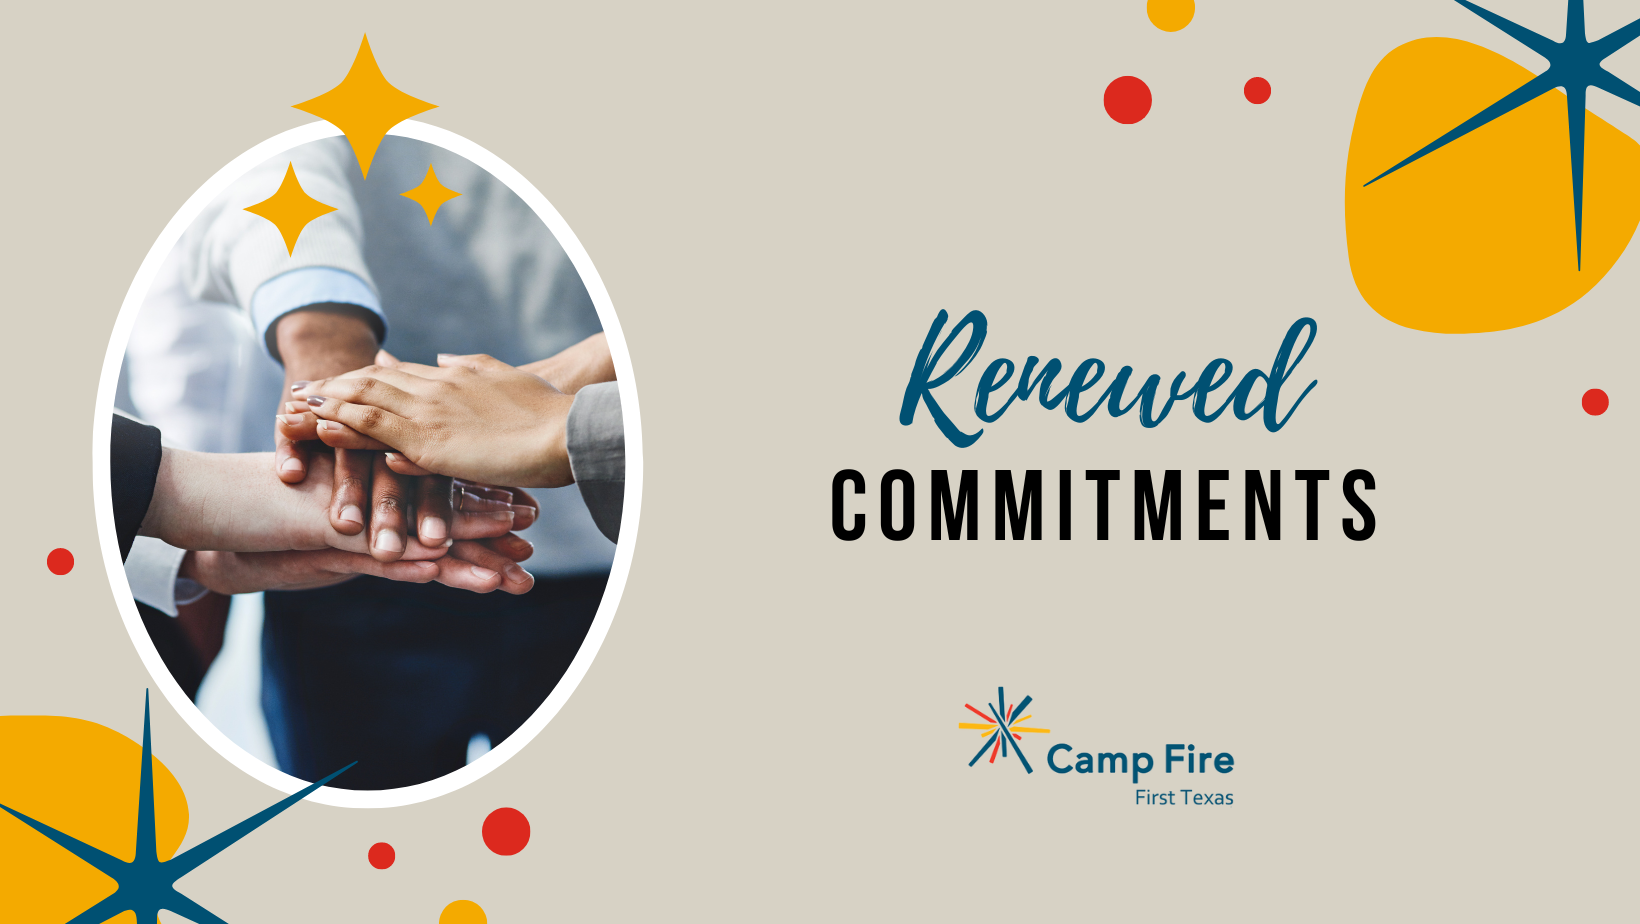 Renewed Commitments, a Camp Fire First Texas blog by Julia Summers